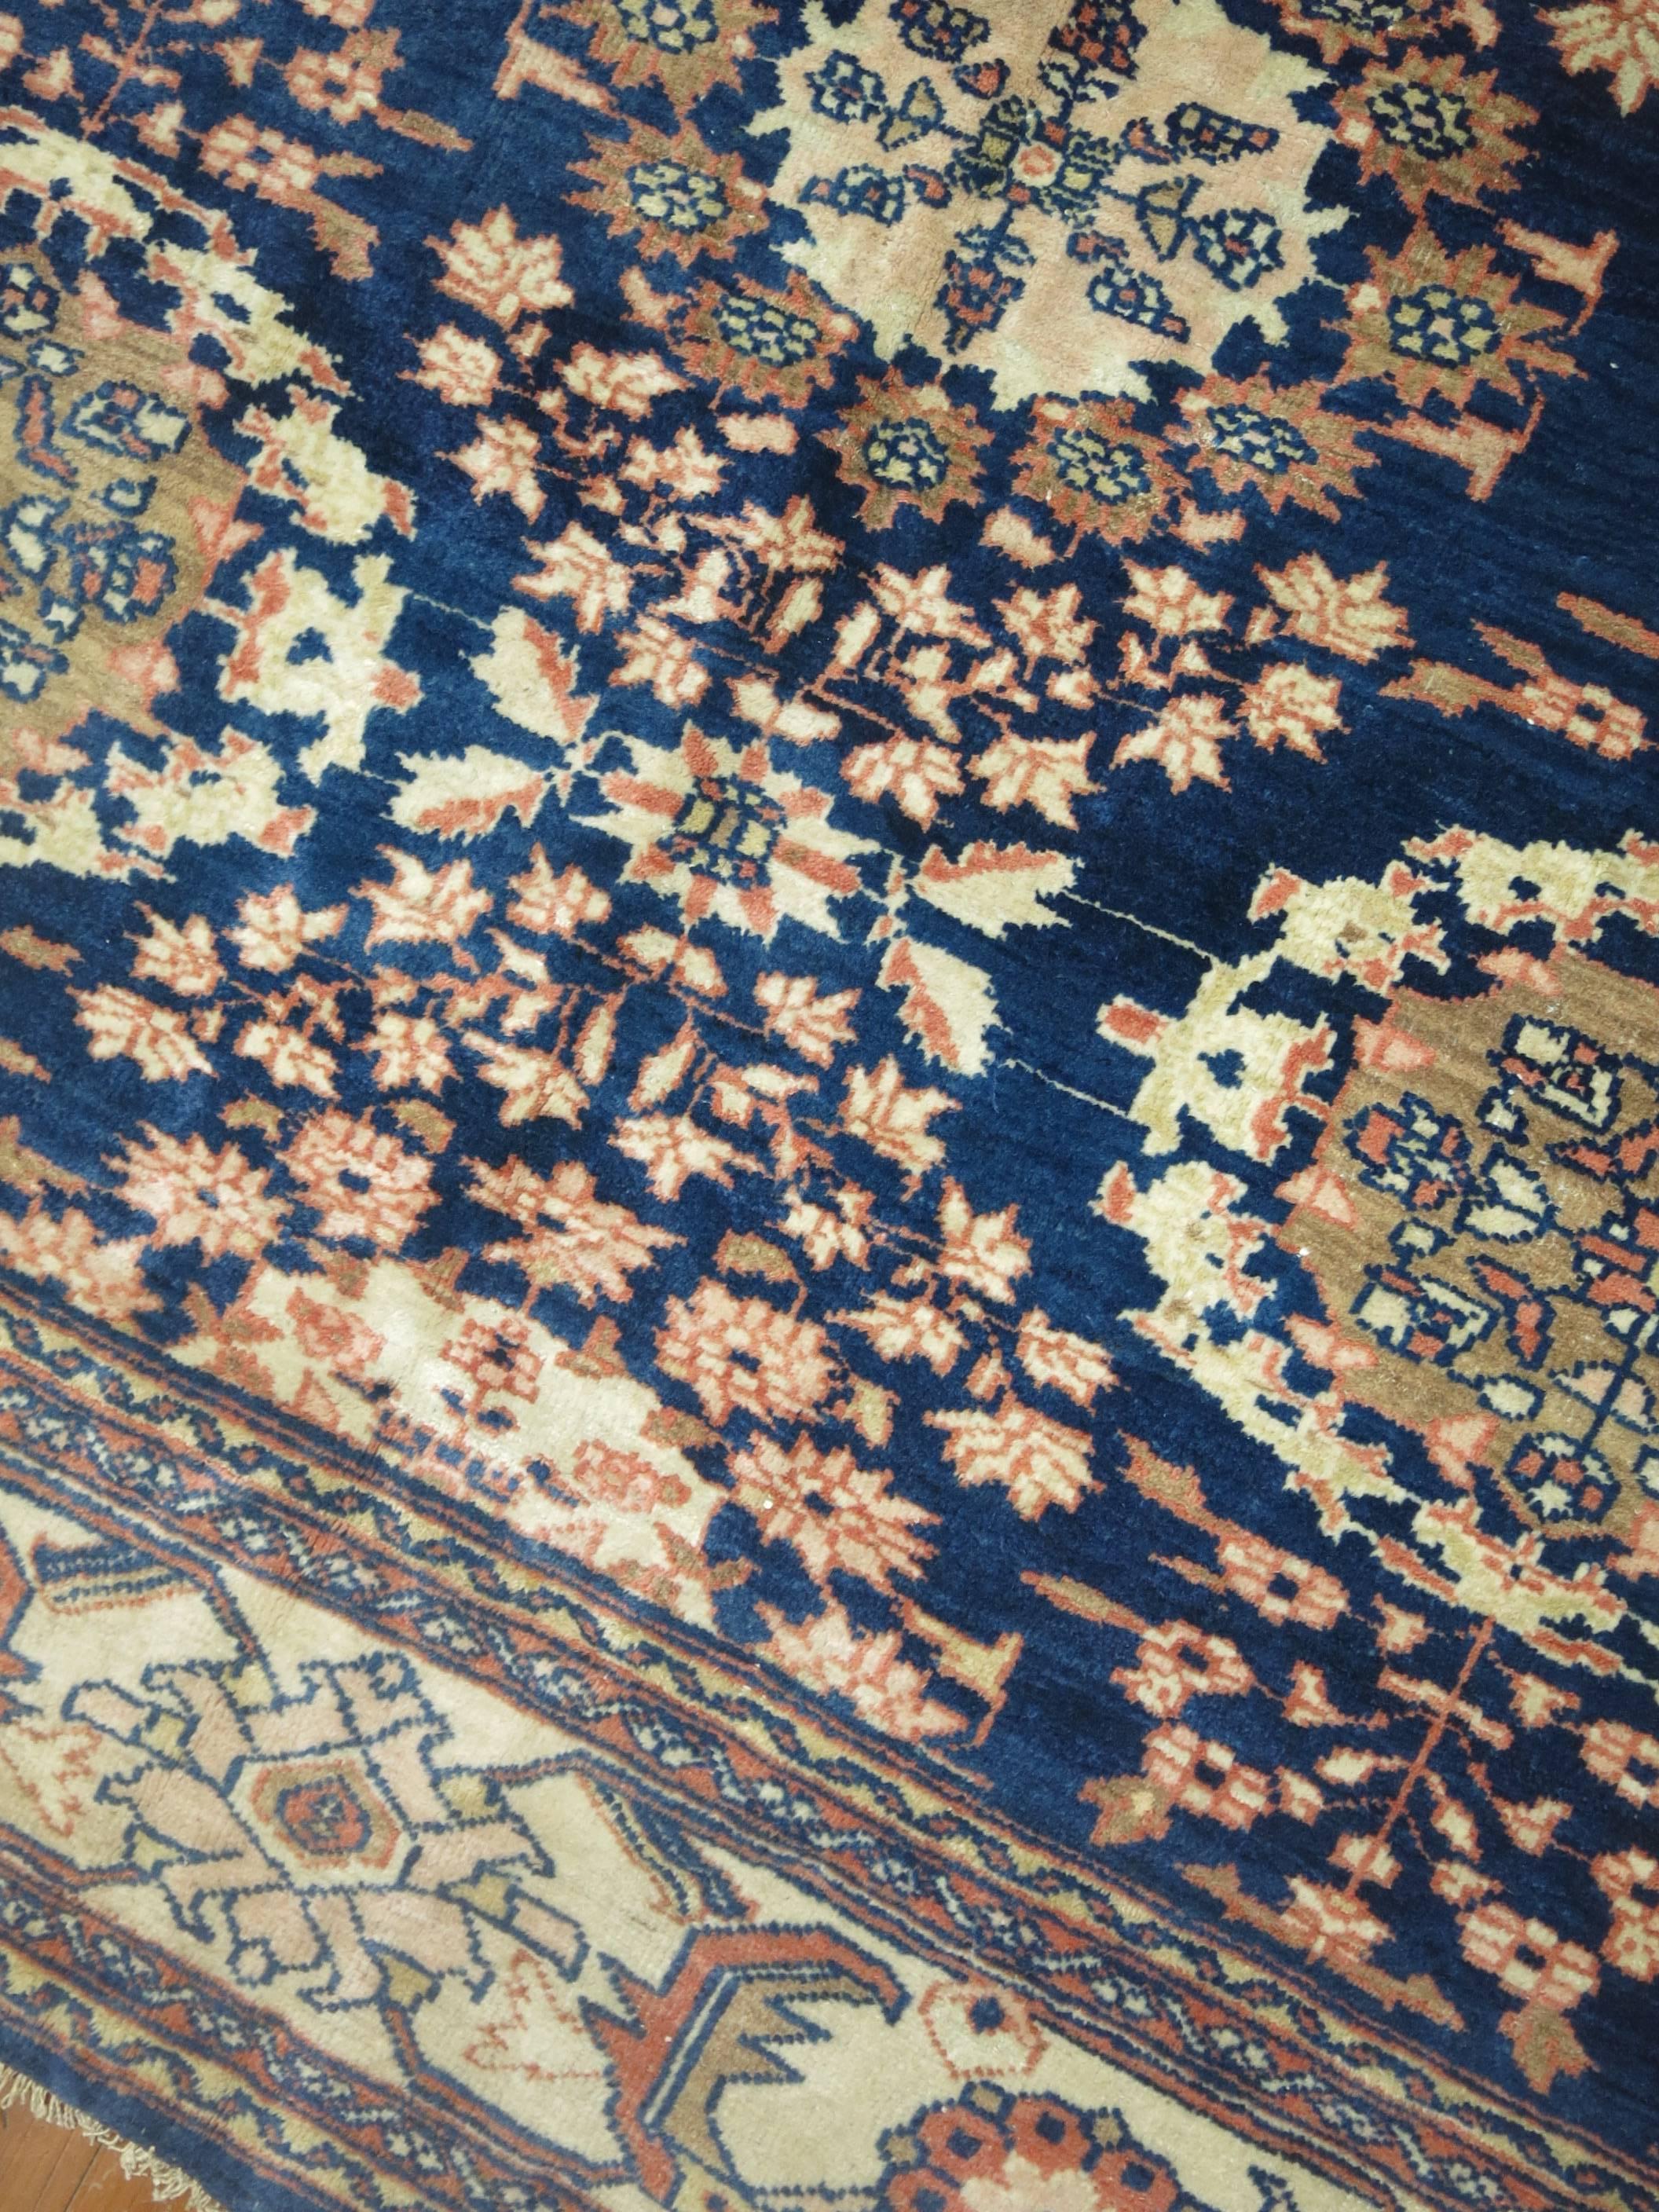 Blue Persian Mahal Carpet In Excellent Condition For Sale In New York, NY